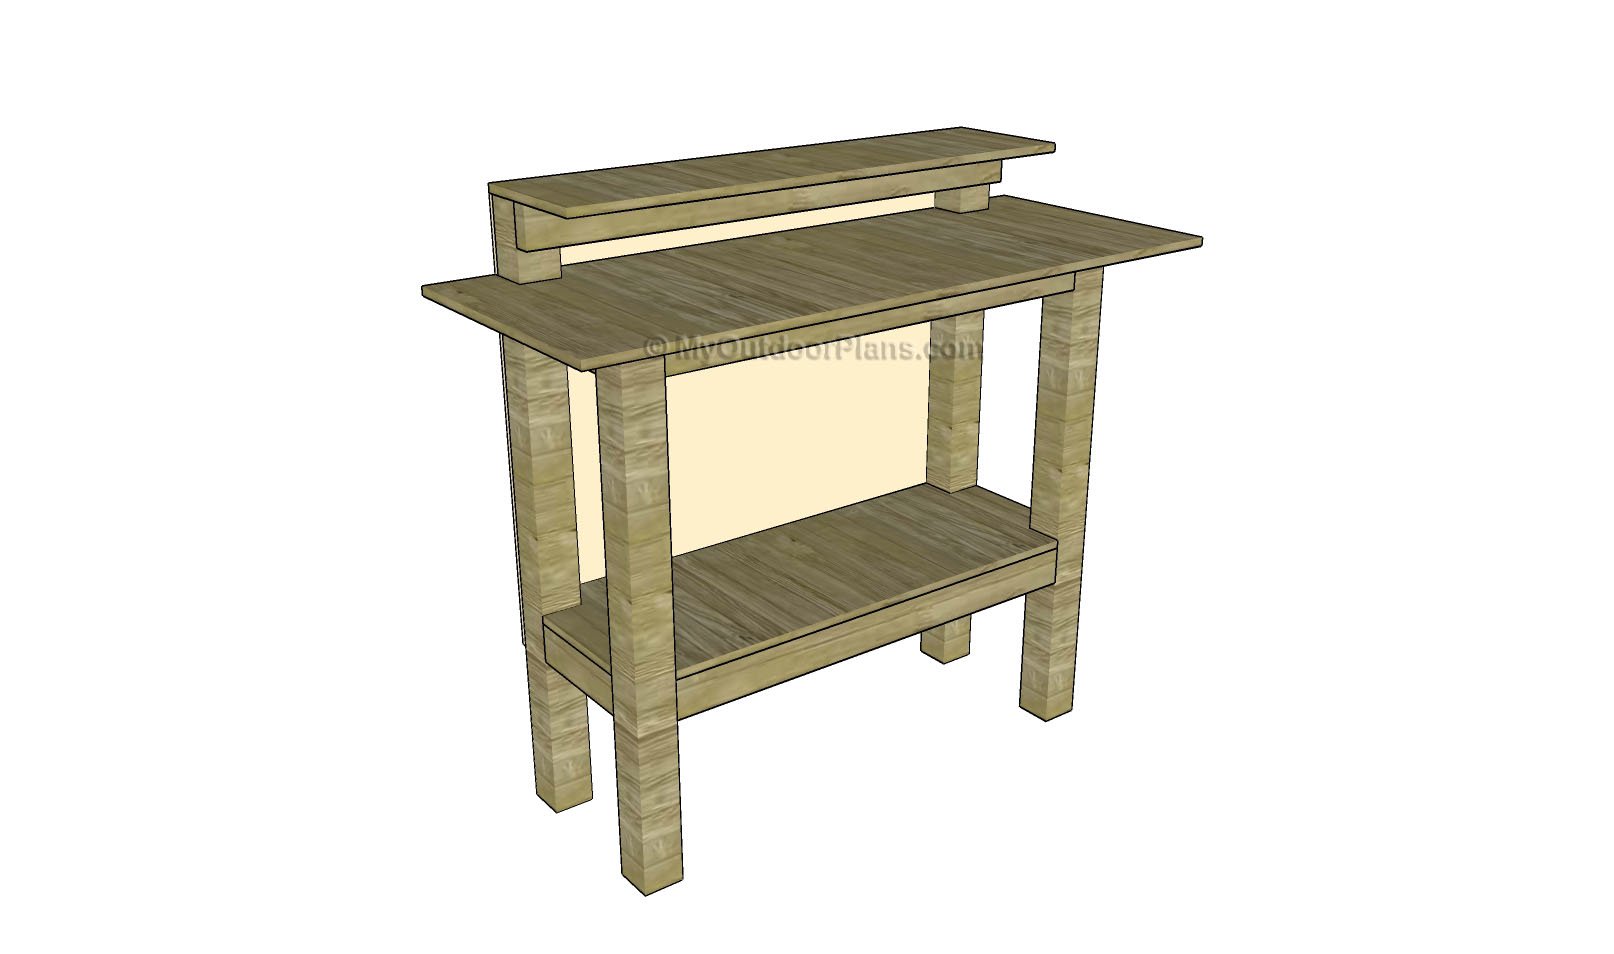 Stand Up Desk Plans Myoutdoorplans Free Woodworking Plans And